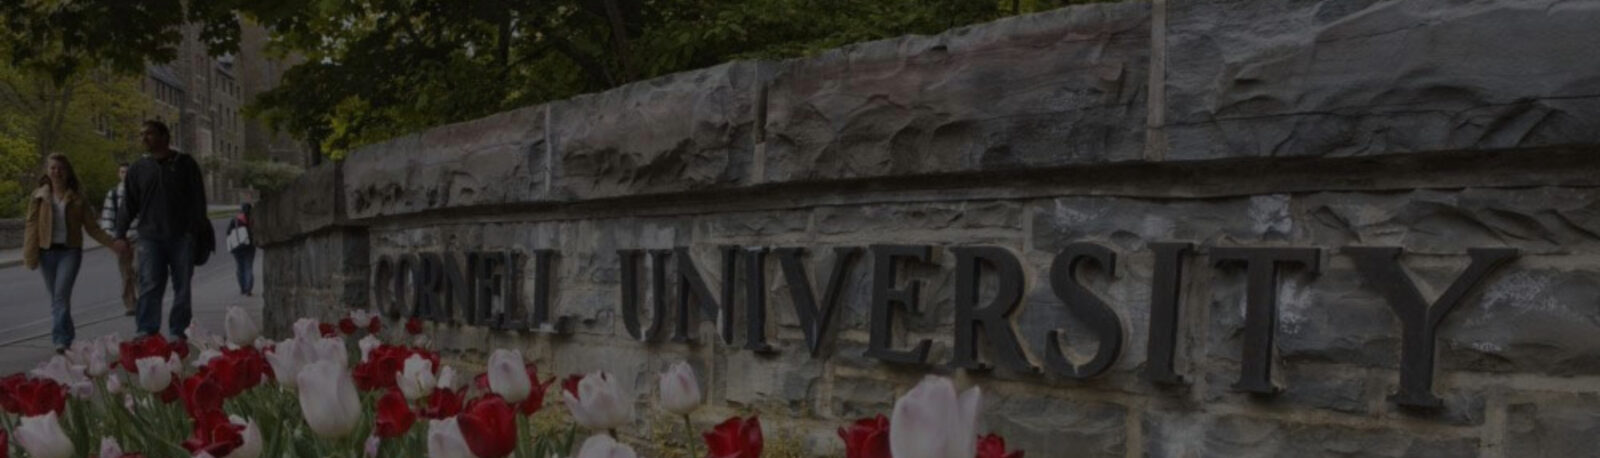 Stone "Cornell University" sign with flowers in front of it